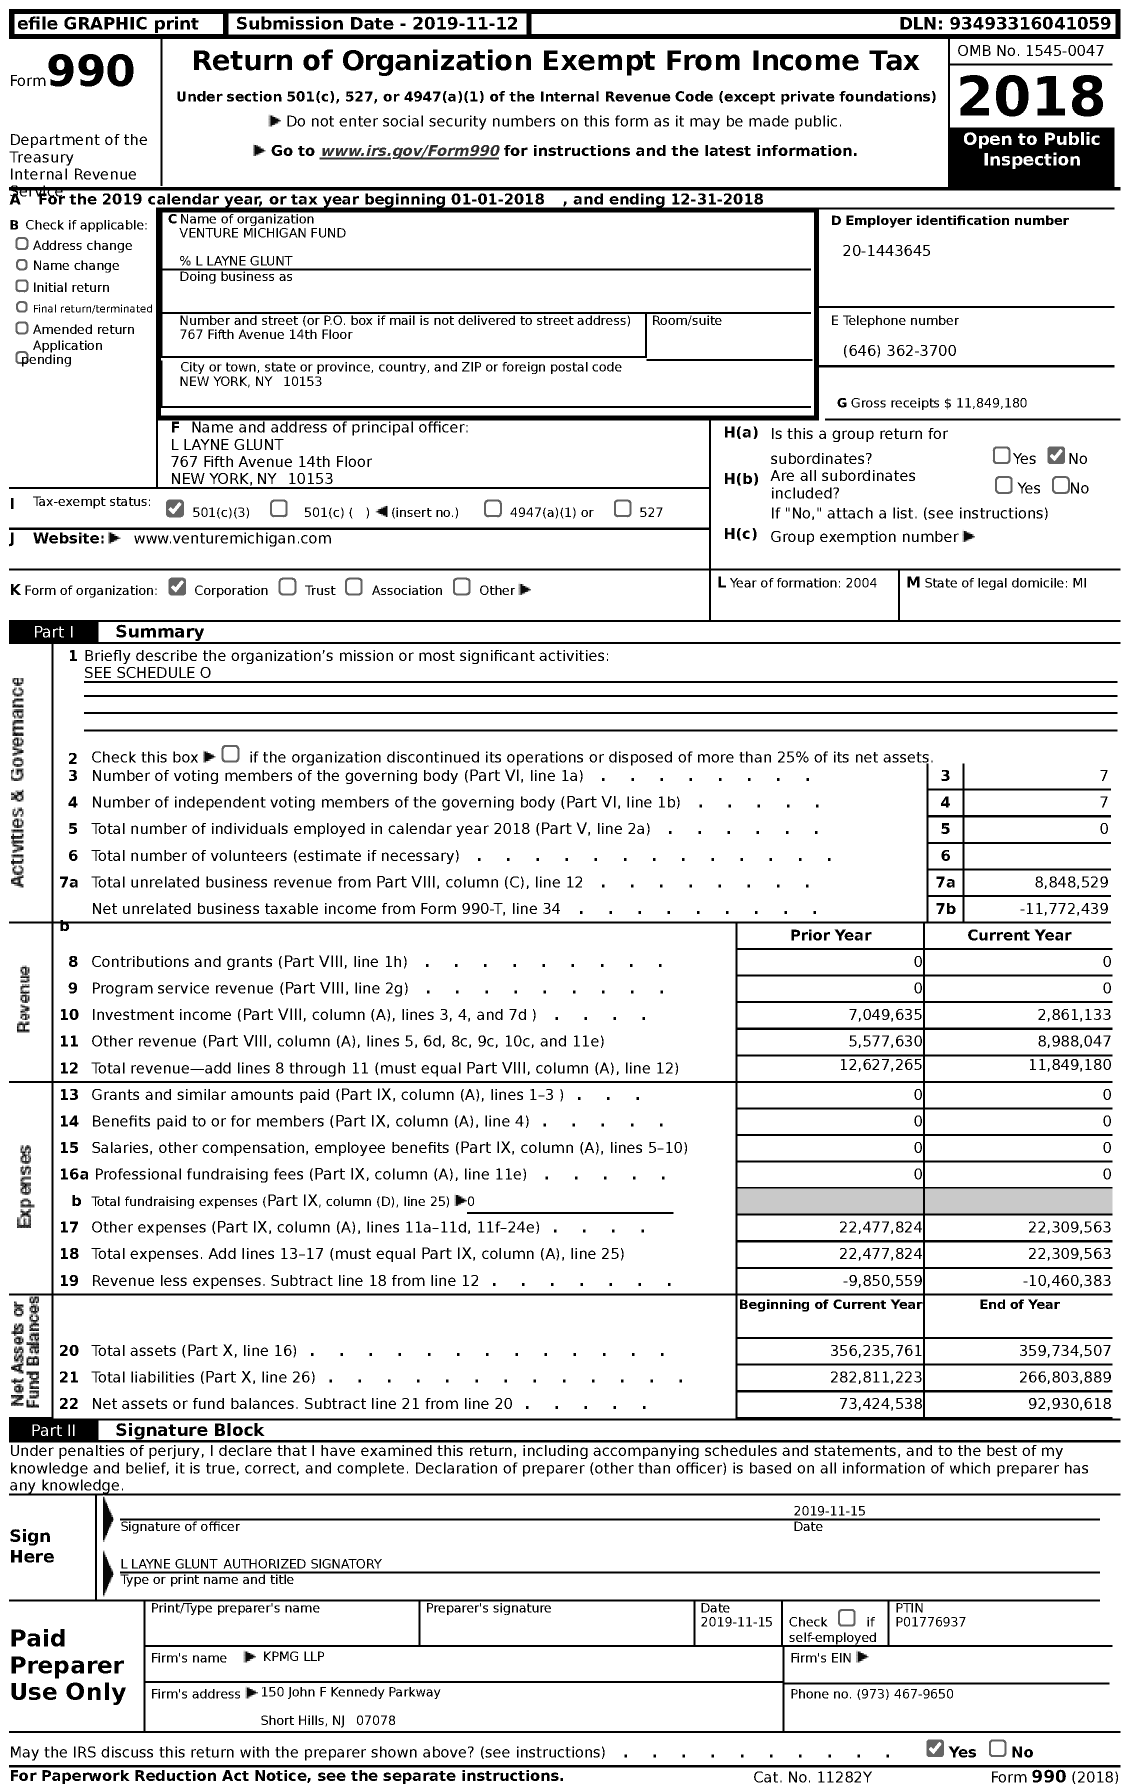 Image of first page of 2018 Form 990 for Venture Michigan Fund (VMF)